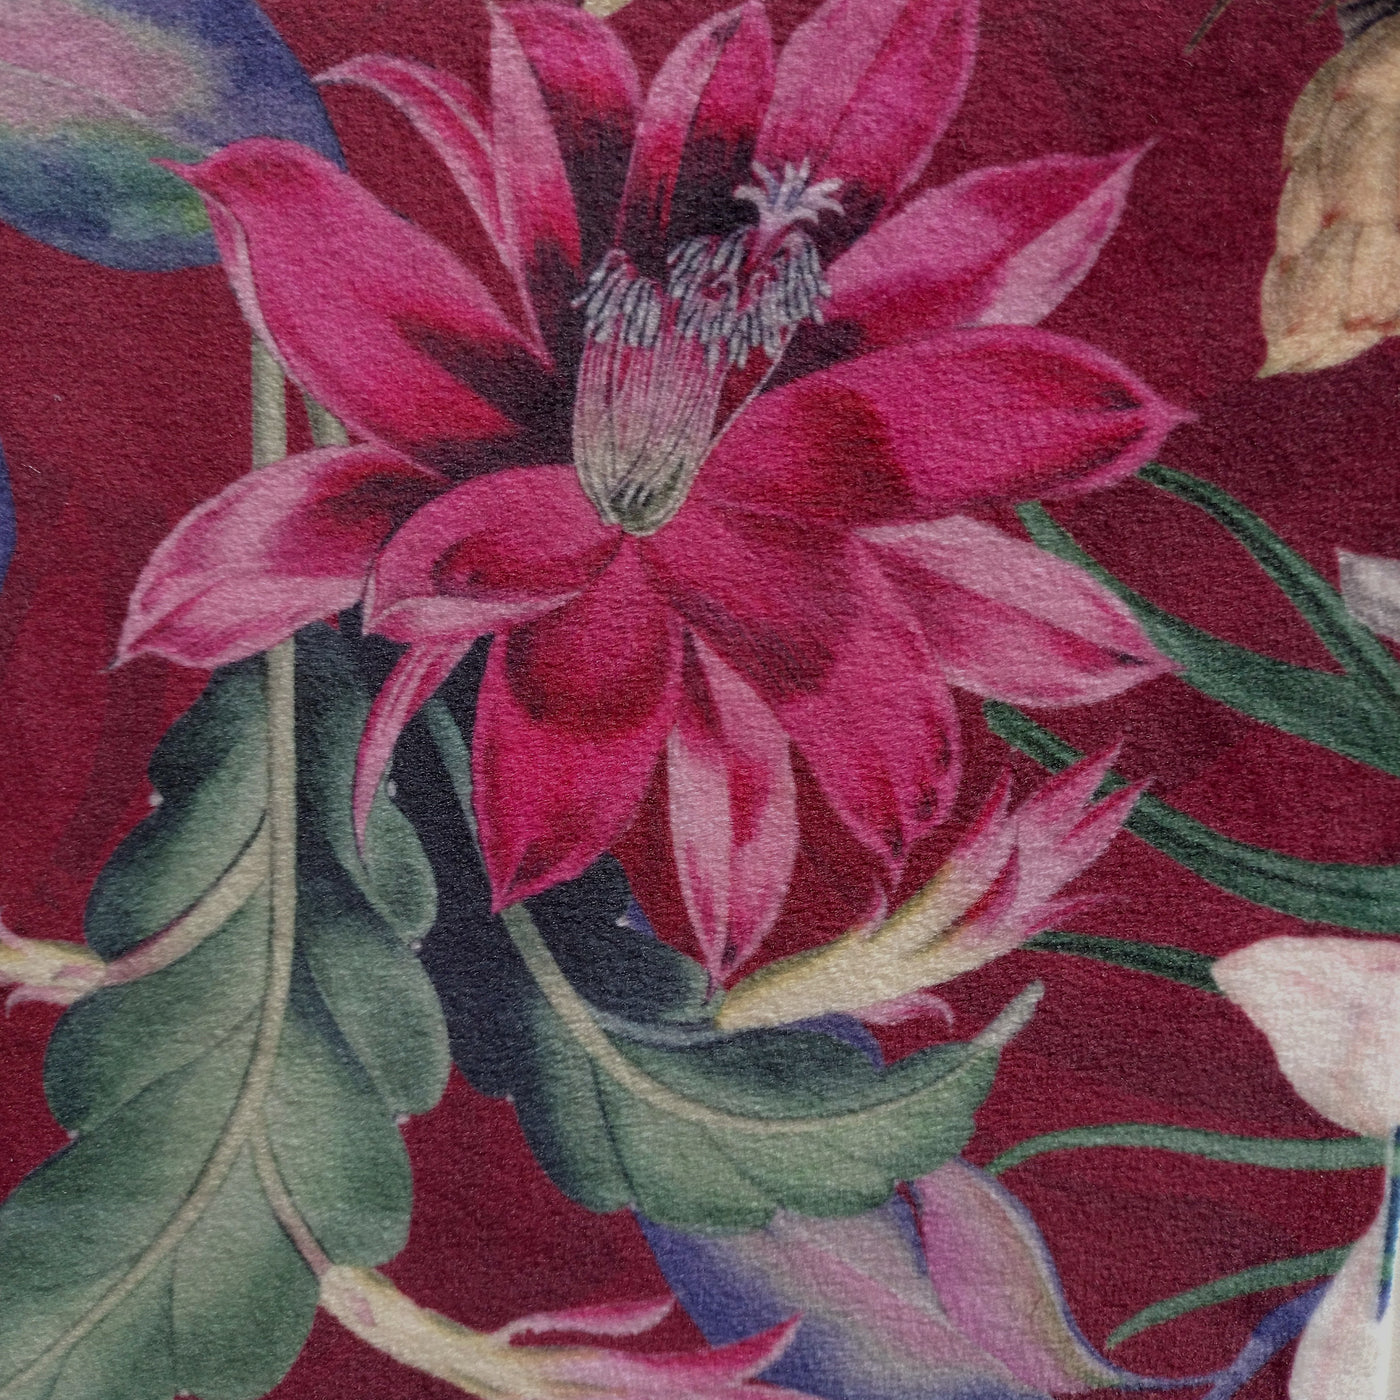 close up of Luxury Blossoms Velvet used for the Light Shade with Copper Lining in Burgundy Red